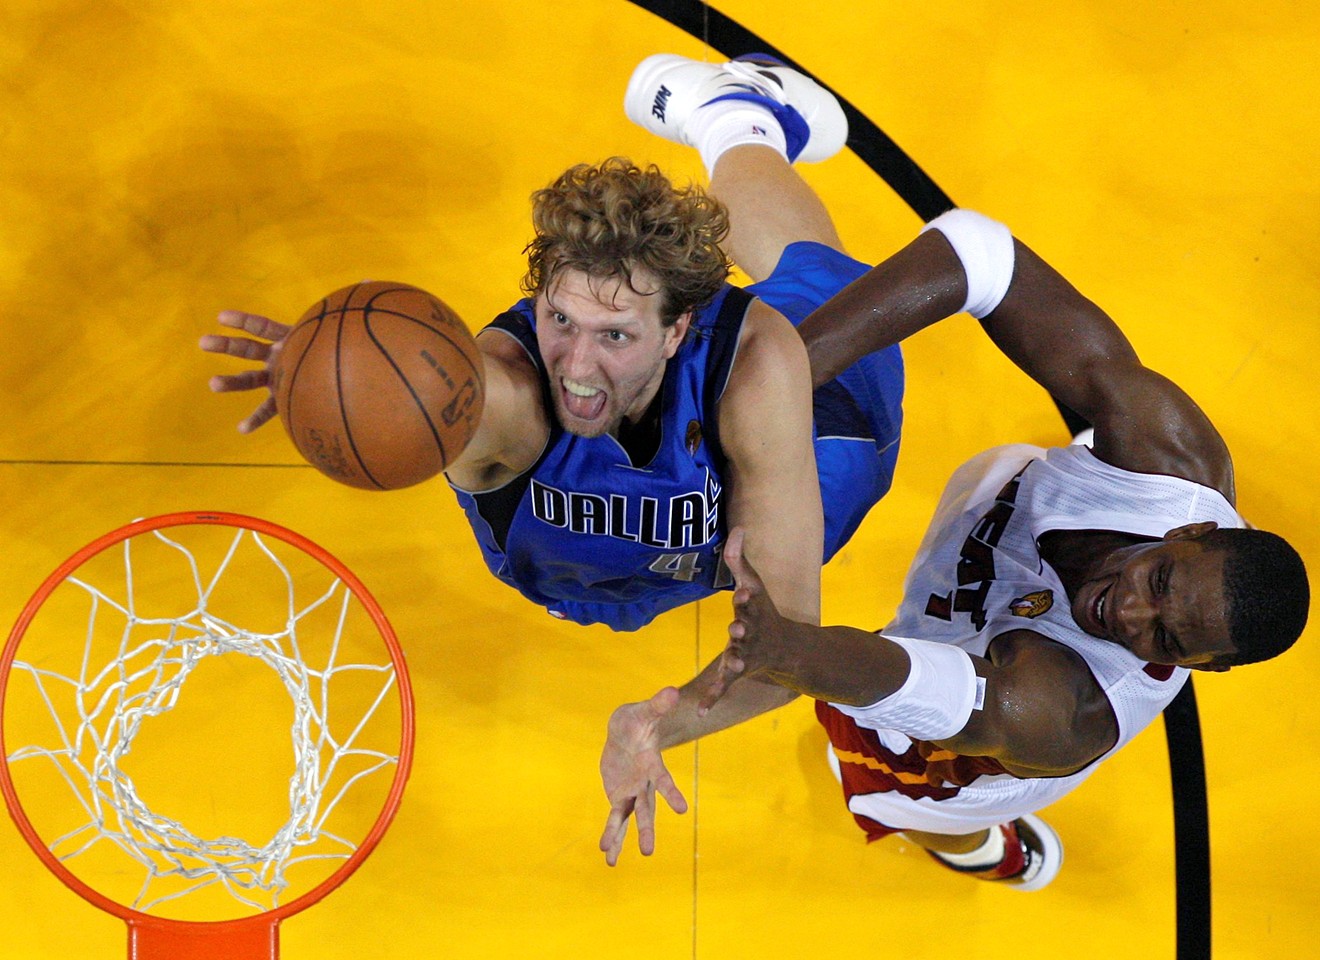 Dallas Mavericks' Dirk Nowitzki  shoots past Miami Heat's Chris Bosh during the first half in Game 1 of the NBA Finals in Miami, May 31, 2011.